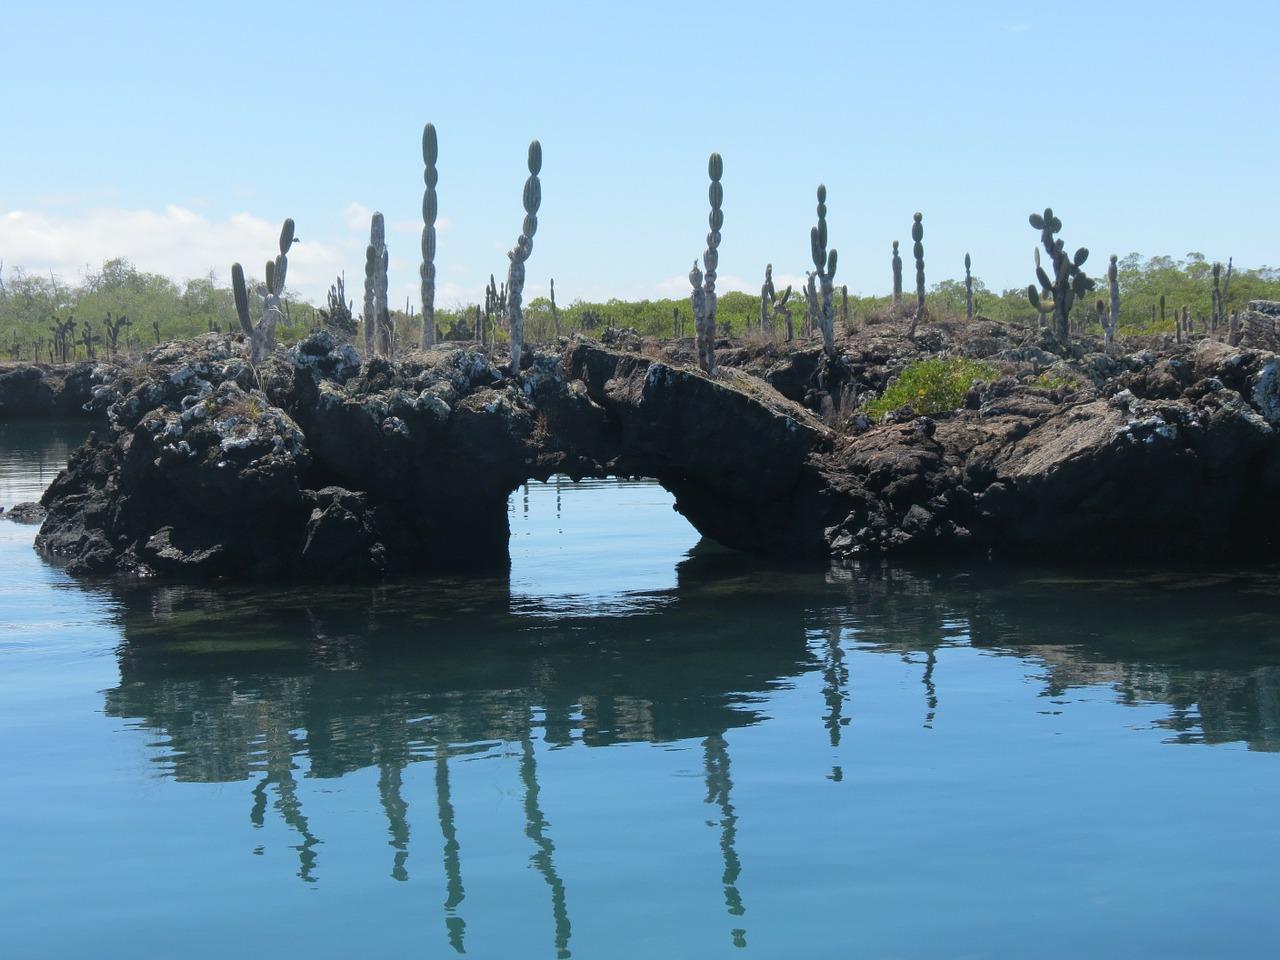 Visitng Galapagos on a budget: The Ultimate Itinerary for the 30+ Traveler